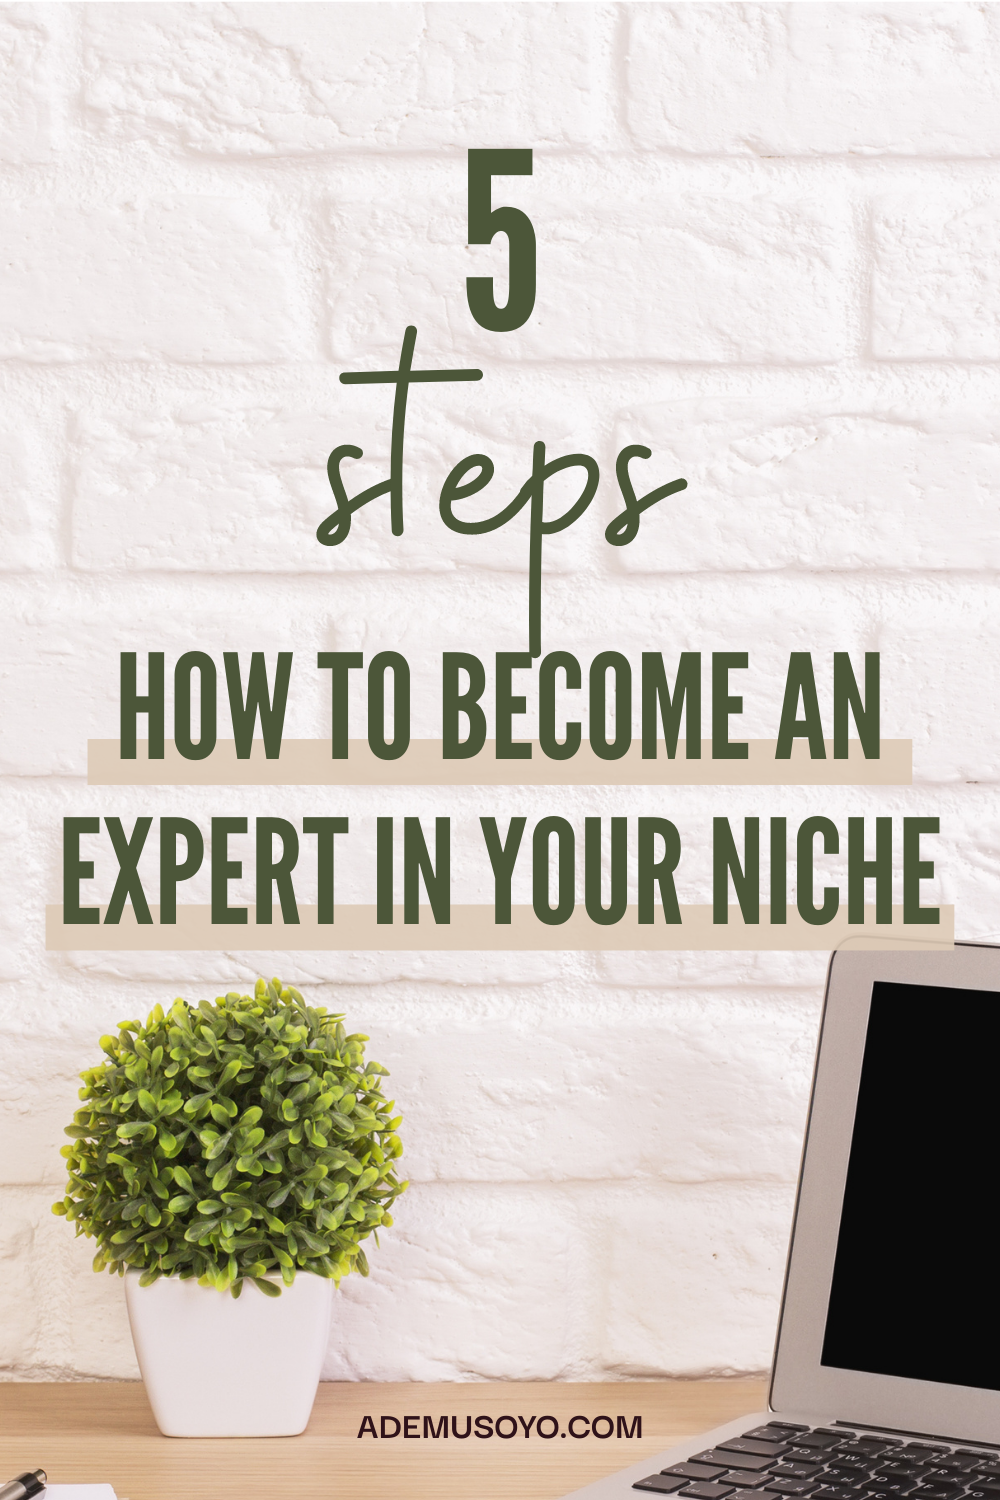 The Ultimate Guide to Becoming an Expert in Your Niche, how to become an expert in your field, how to be seen as an expert in your niche